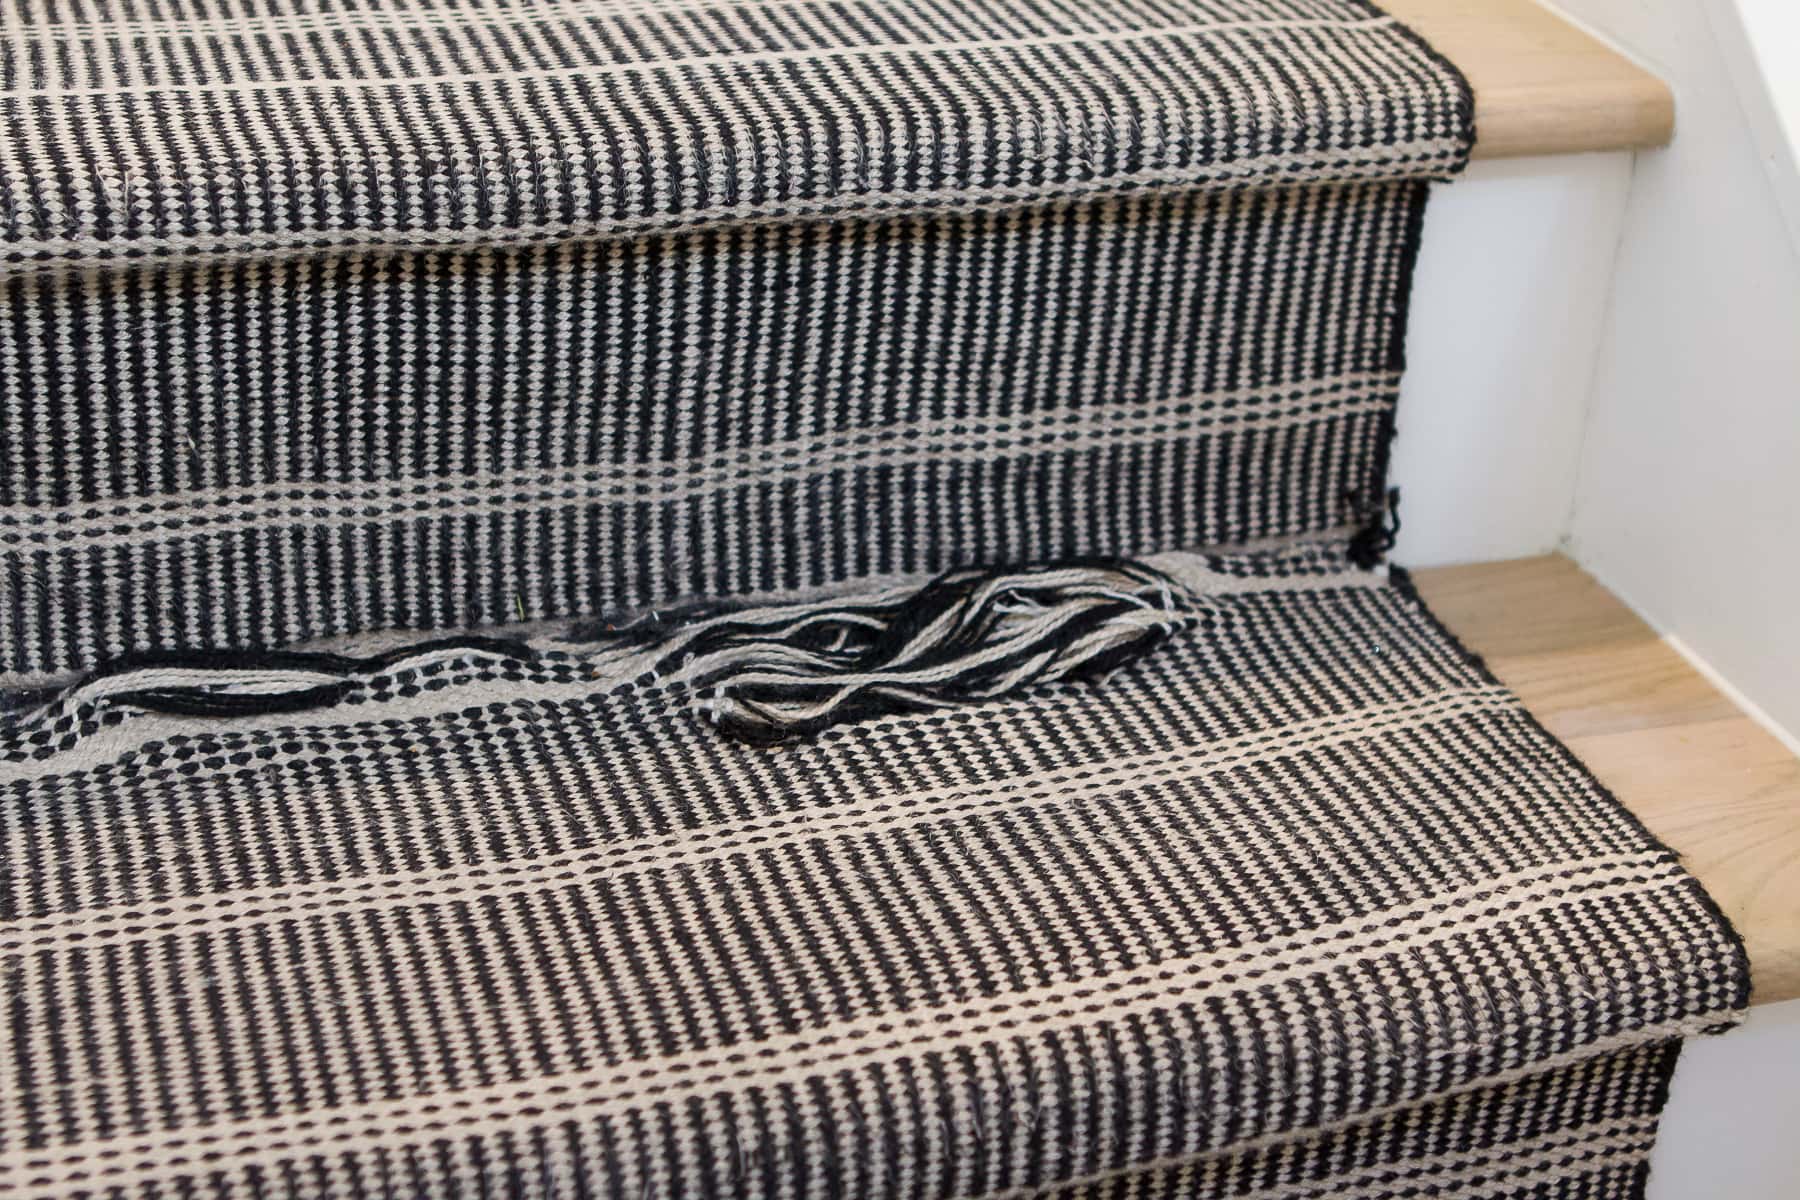 Our stair runner unraveling